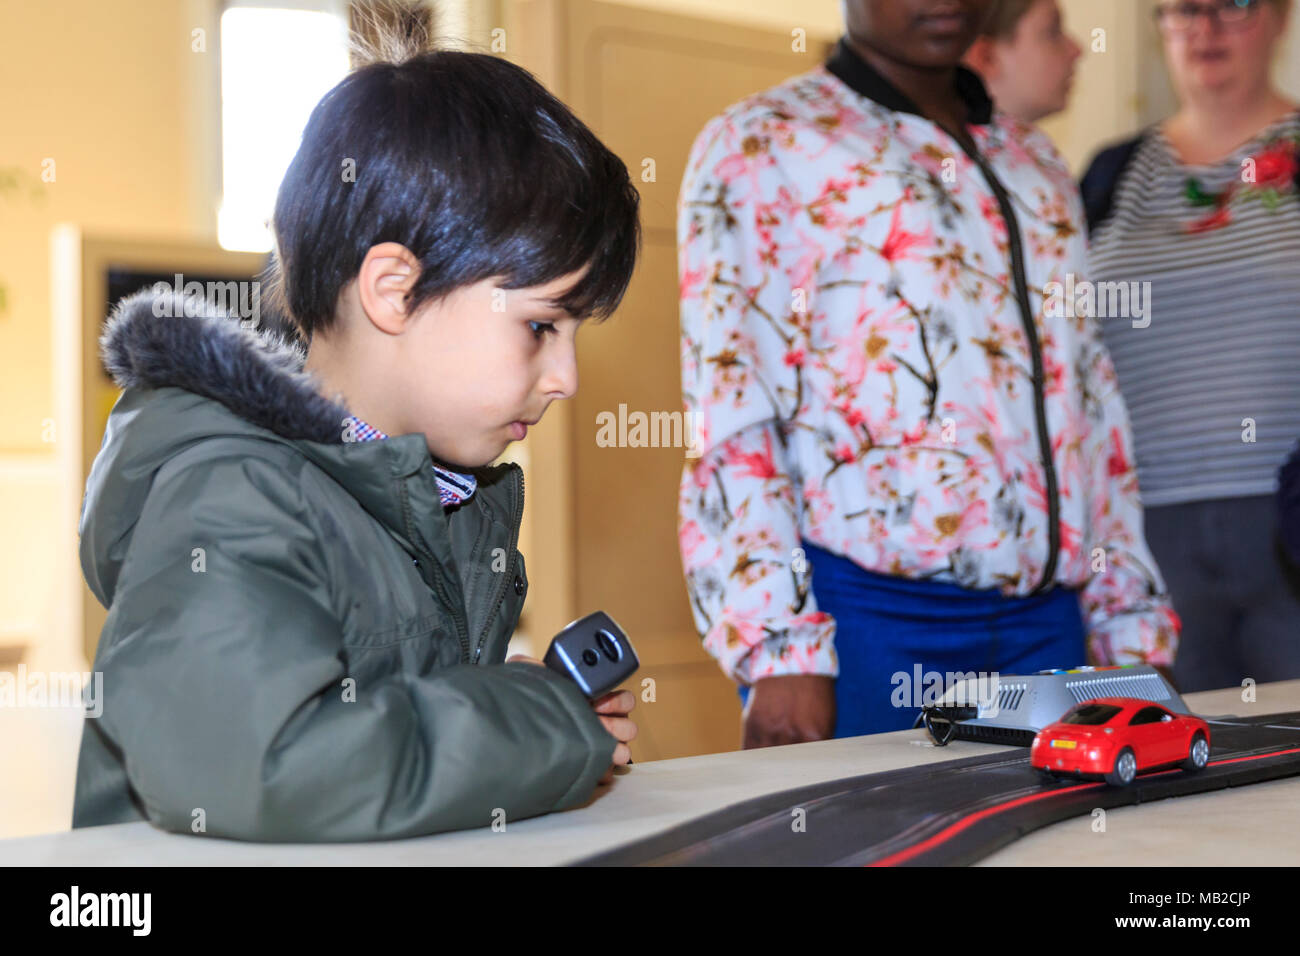 Somerset House, London, 6th April 2018. Yara El-Sherbini's 'Roadmap to Peace' represents two roads in Israel and Palestine, but can also be enjoyed at a more simple level by visiting children - and this young boy is clearly fascinated. Visitors, particularly children, enjoy interacting with the games. Now Play This is an interactive exhibition and festival of game design opening today at Somerset House in Central London. Credit: Imageplotter News and Sports/Alamy Live News Stock Photo